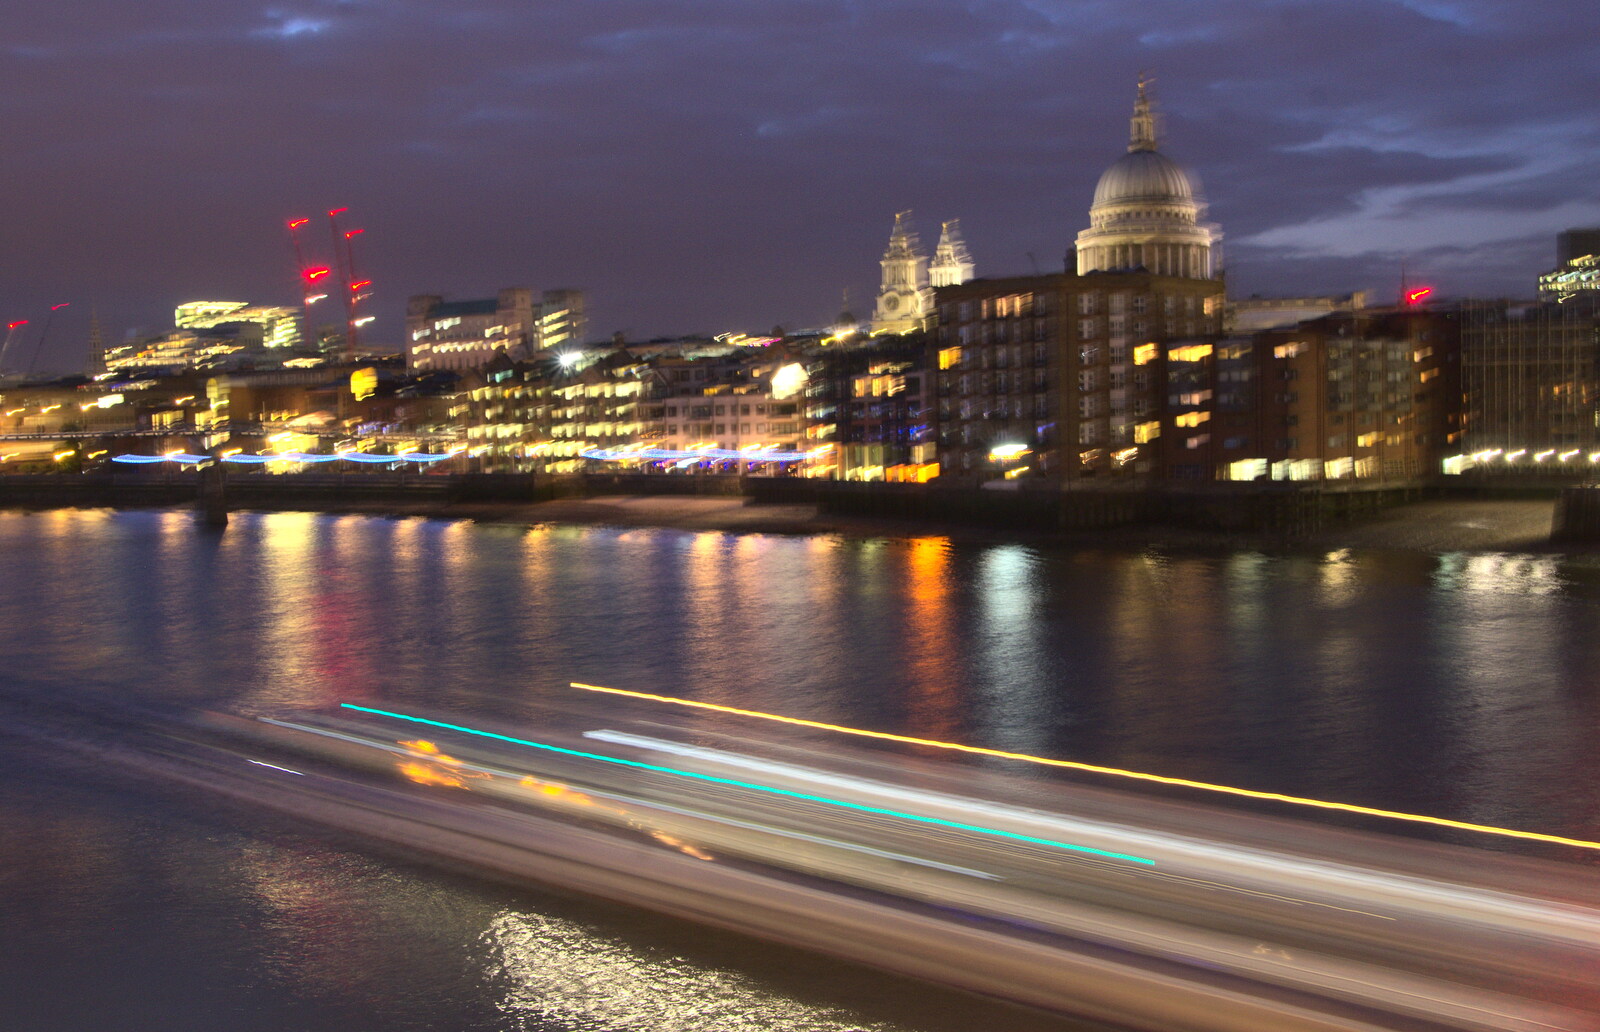 A river taxi floats by in  a blurry trail from SwiftKey Innovation Week, Southwark Bridge Road, London - 7th October 2015